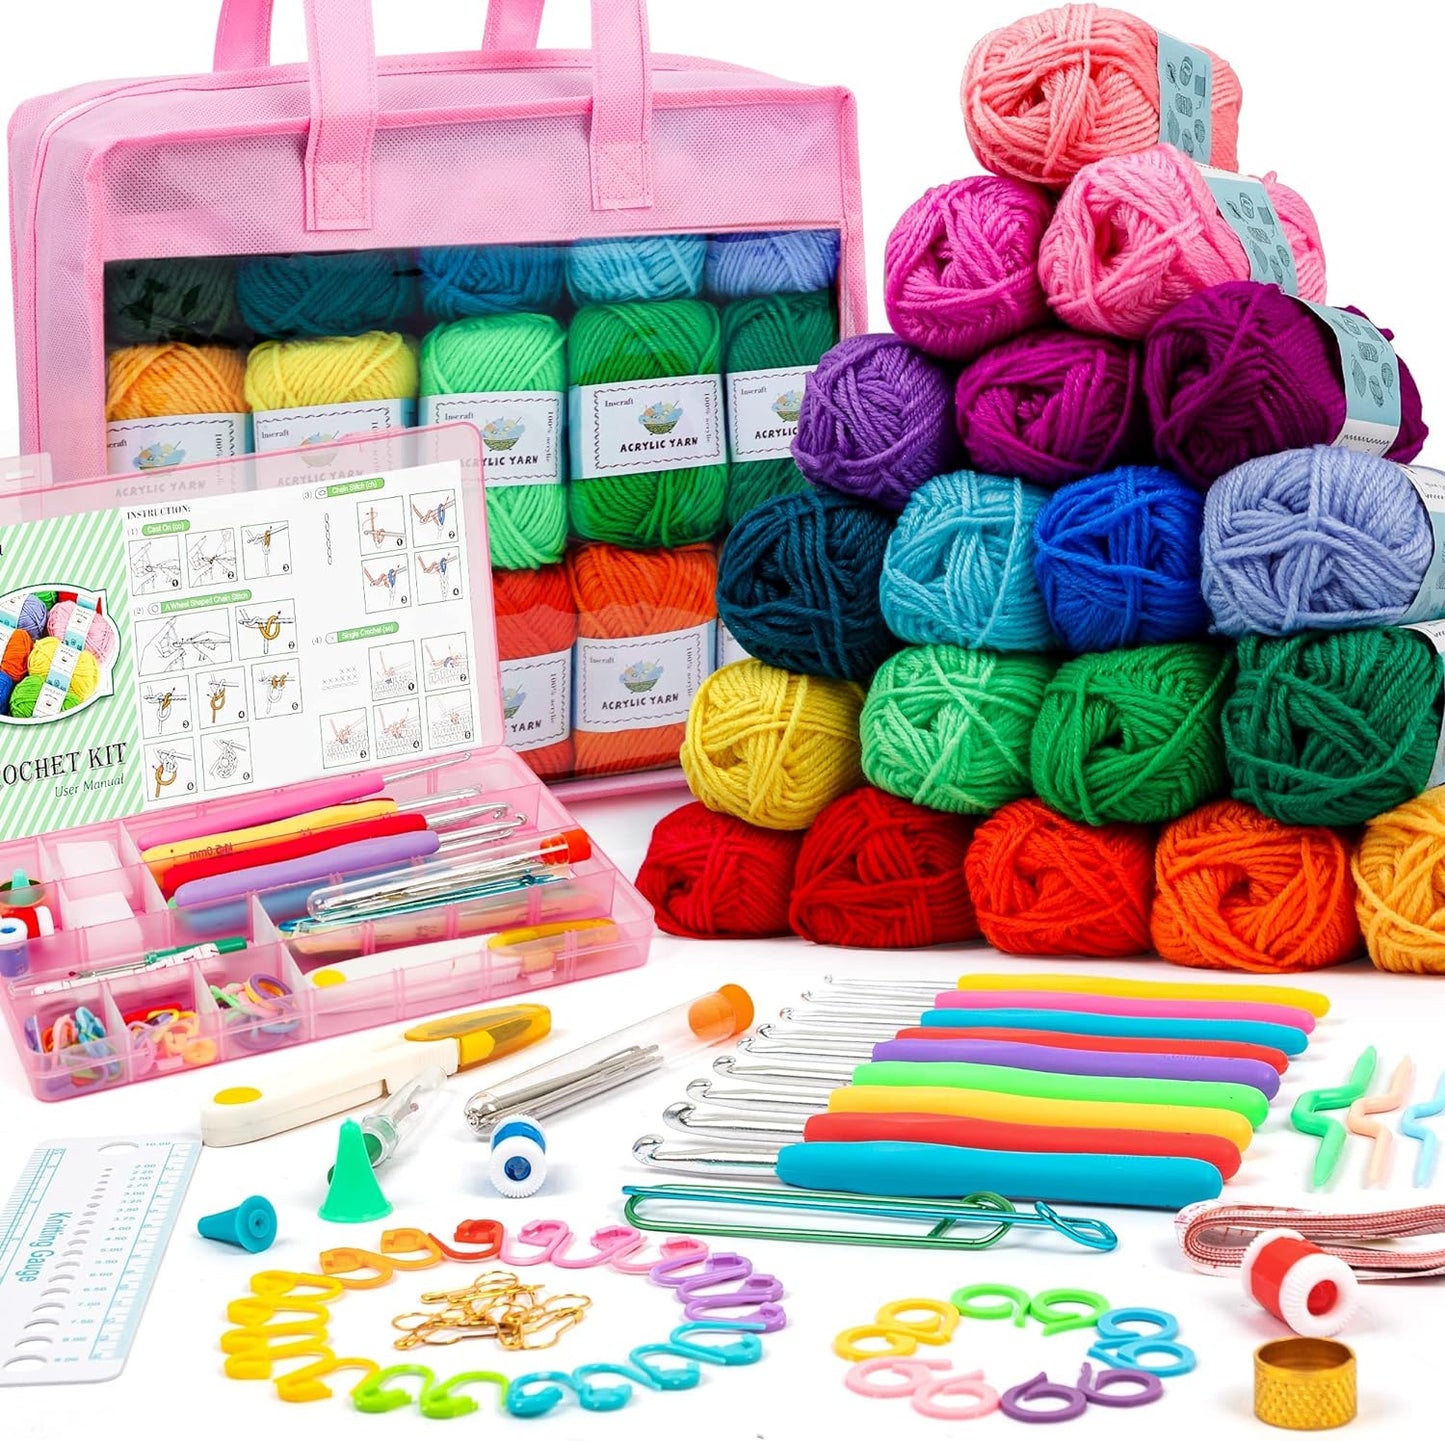 103 PCS Crochet Kit with Crochet Hooks Yarn Set, Premium Bundle Includes 1650 Yards Acrylic Yarn Skeins Balls, Needles, Accessories, Bag, Ideal Starter Pack for Kids Adults Beginner Professionals